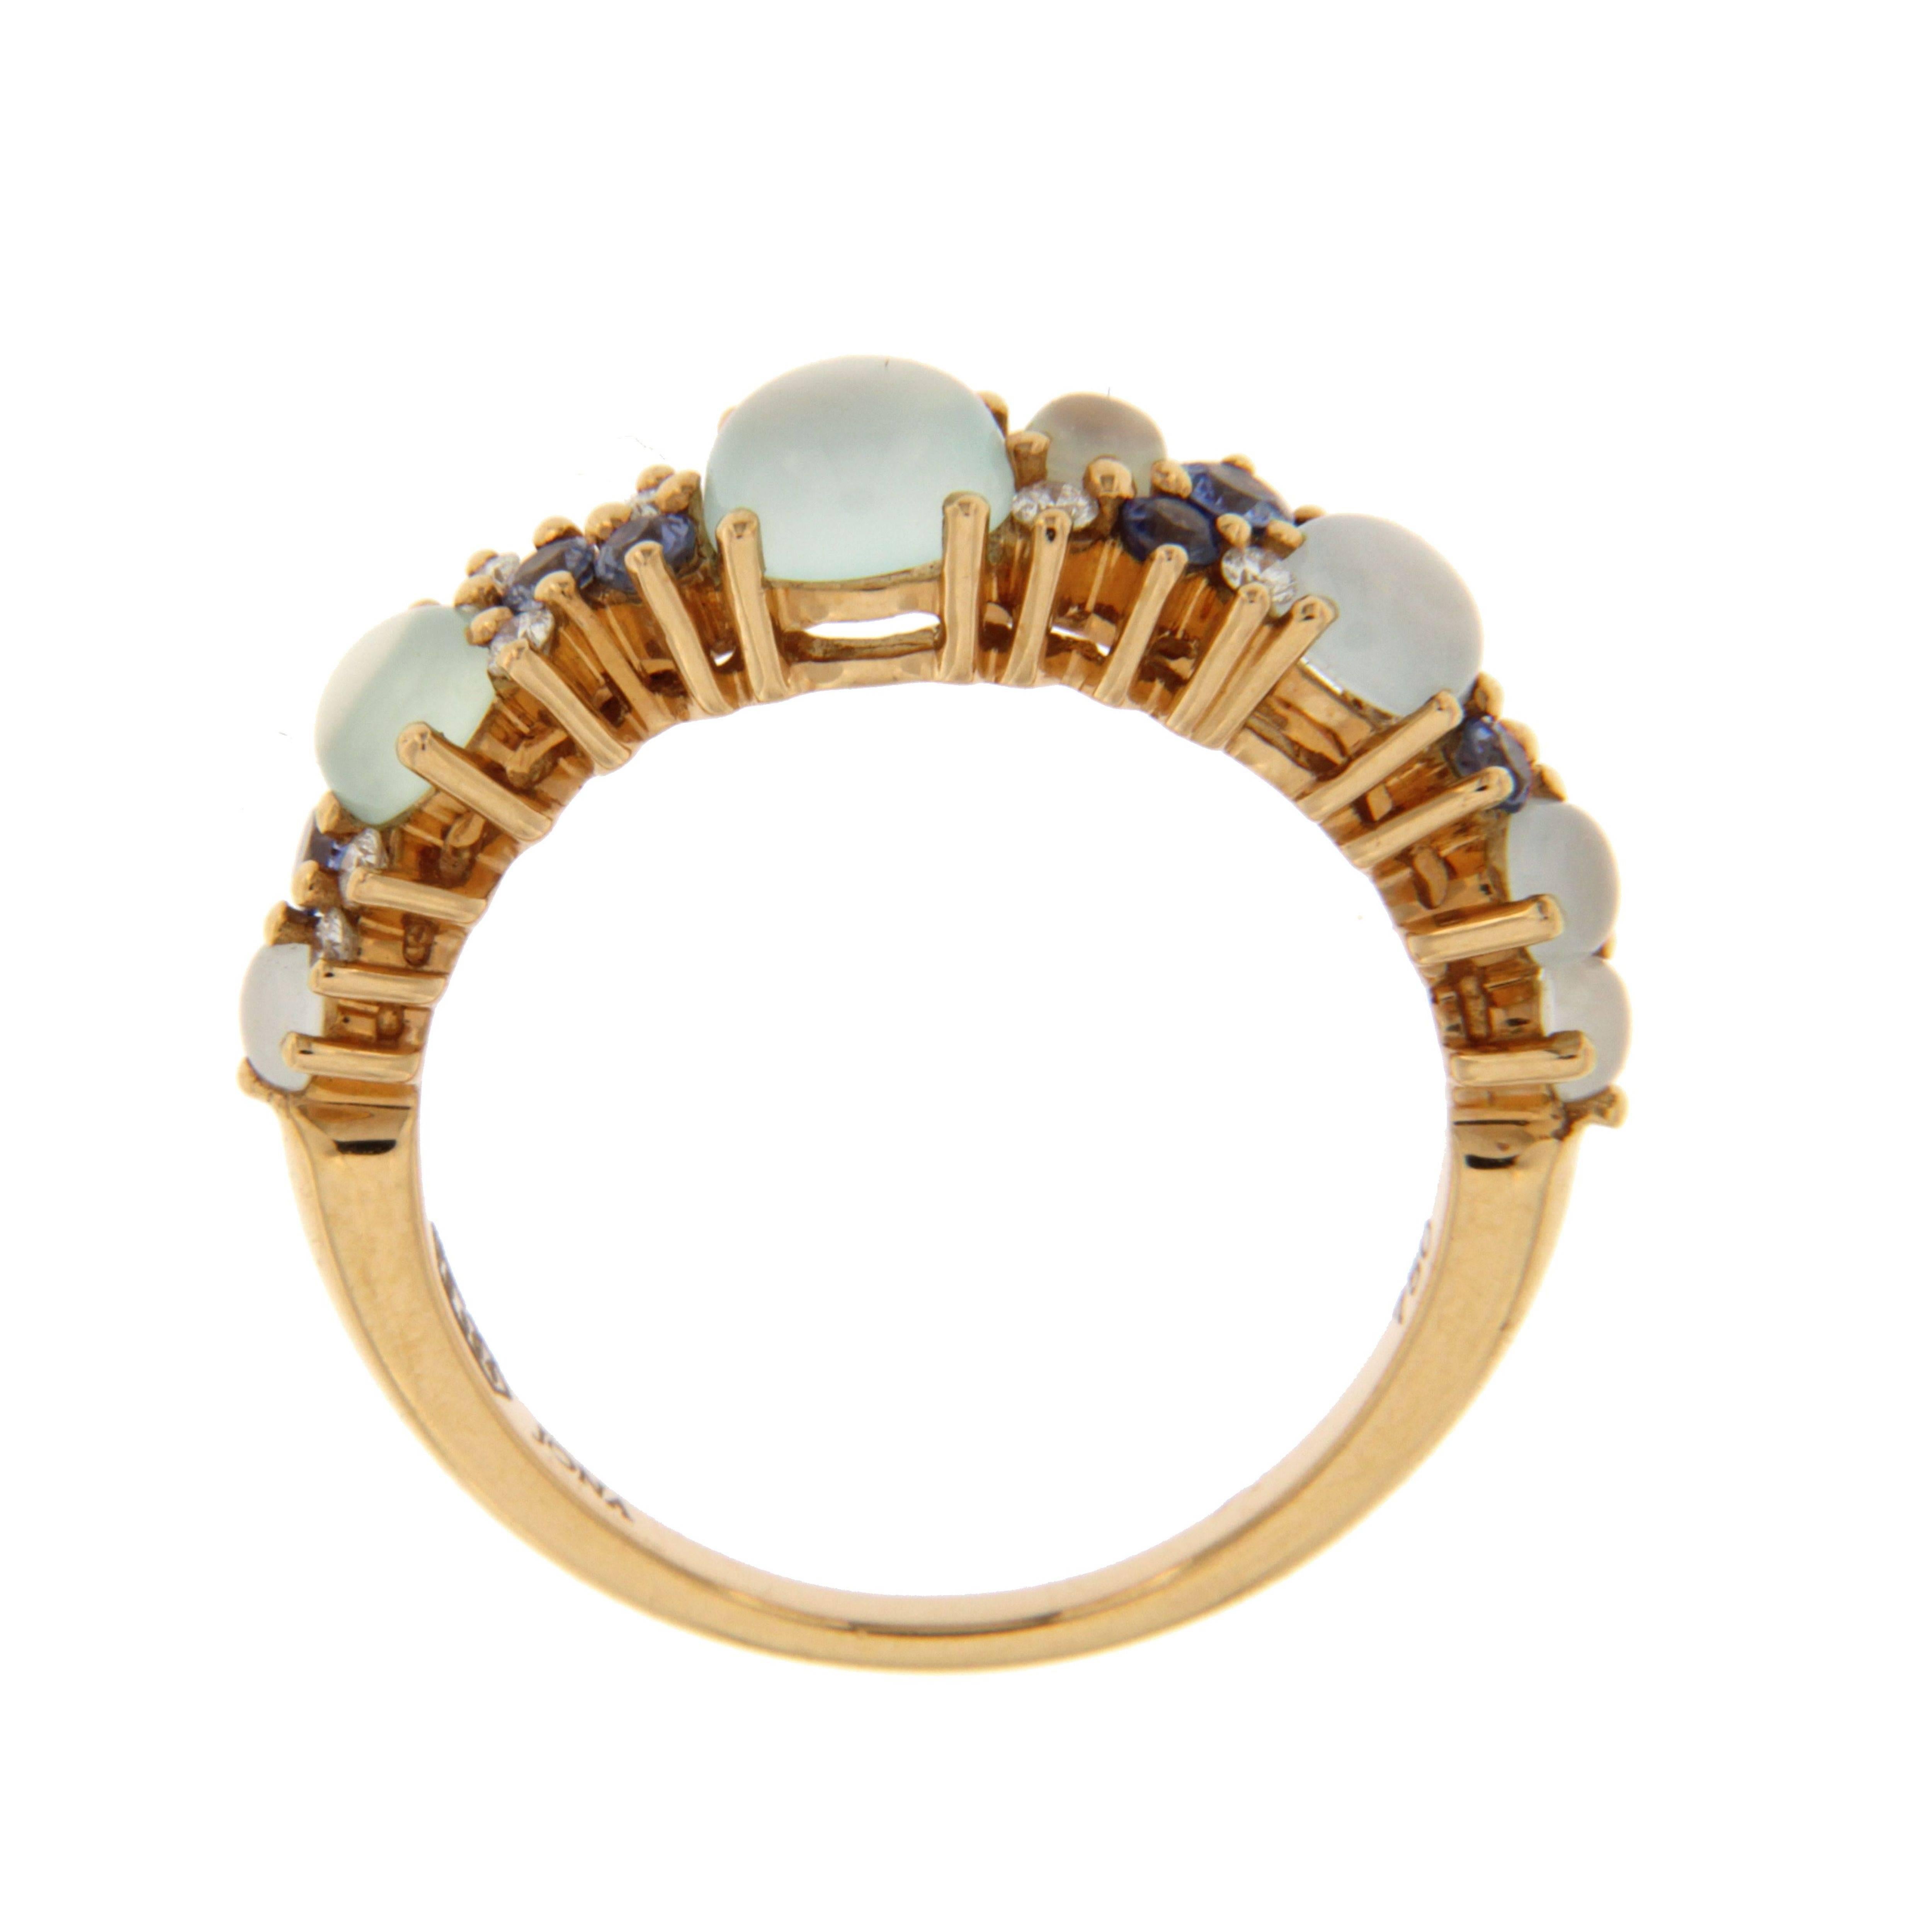 Jona design collection, hand crafted in Italy, 18 karat rose gold ring band, set with cabochon chalcedonies, blue sapphires, aquamarines and 0.12 carats of white diamonds.
Size: US 6/ EU 12. Can be sized to any specification.
All Jona jewelry is